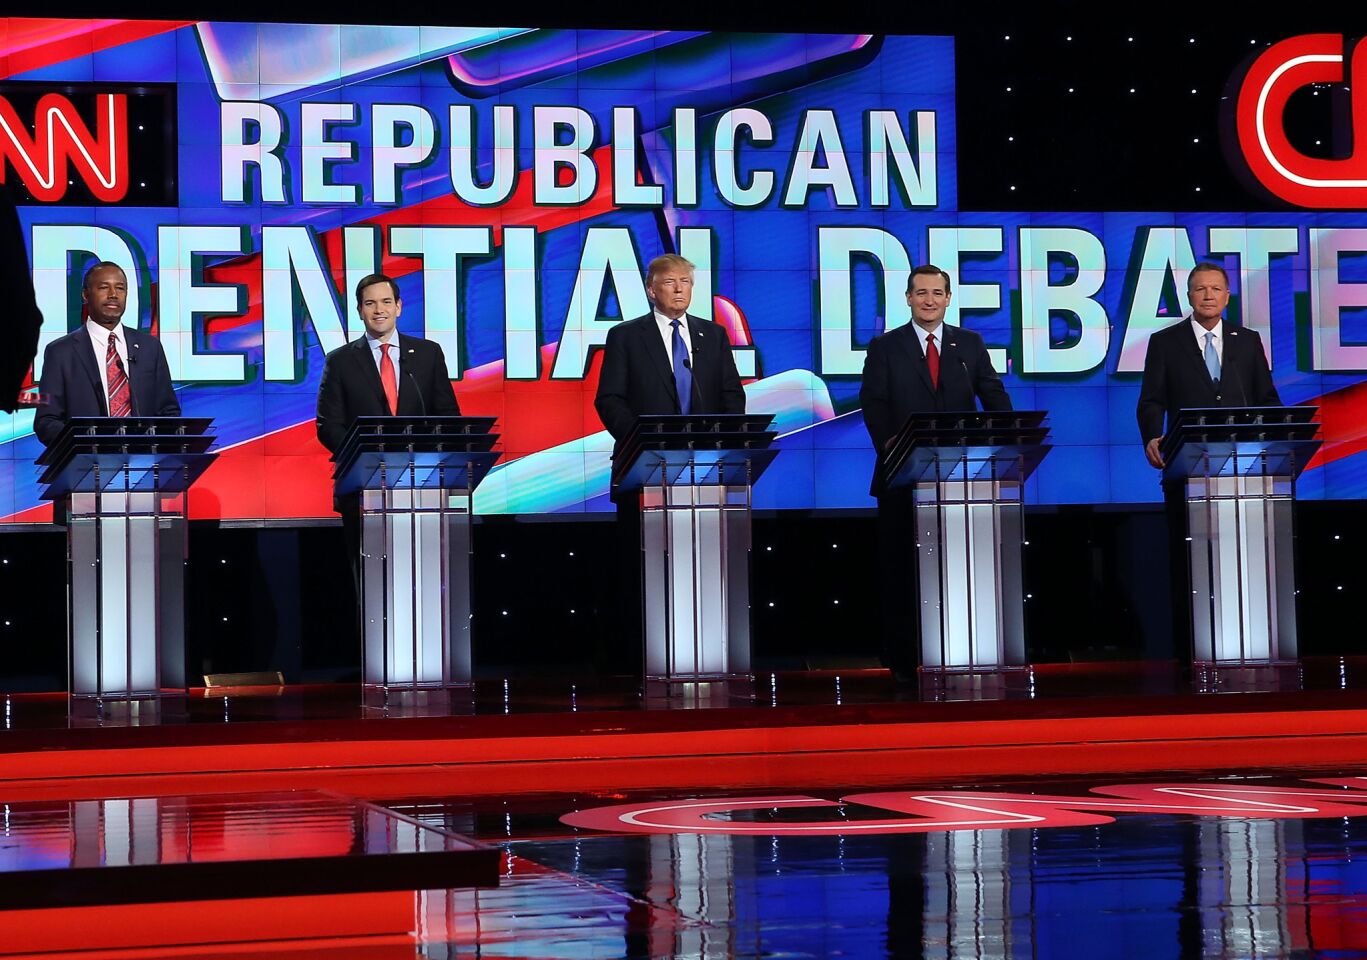 Republican presidential candidates, from left, Ben Carson, Marco Rubio, Donald Trump, Ted Cruz and John Kasich.